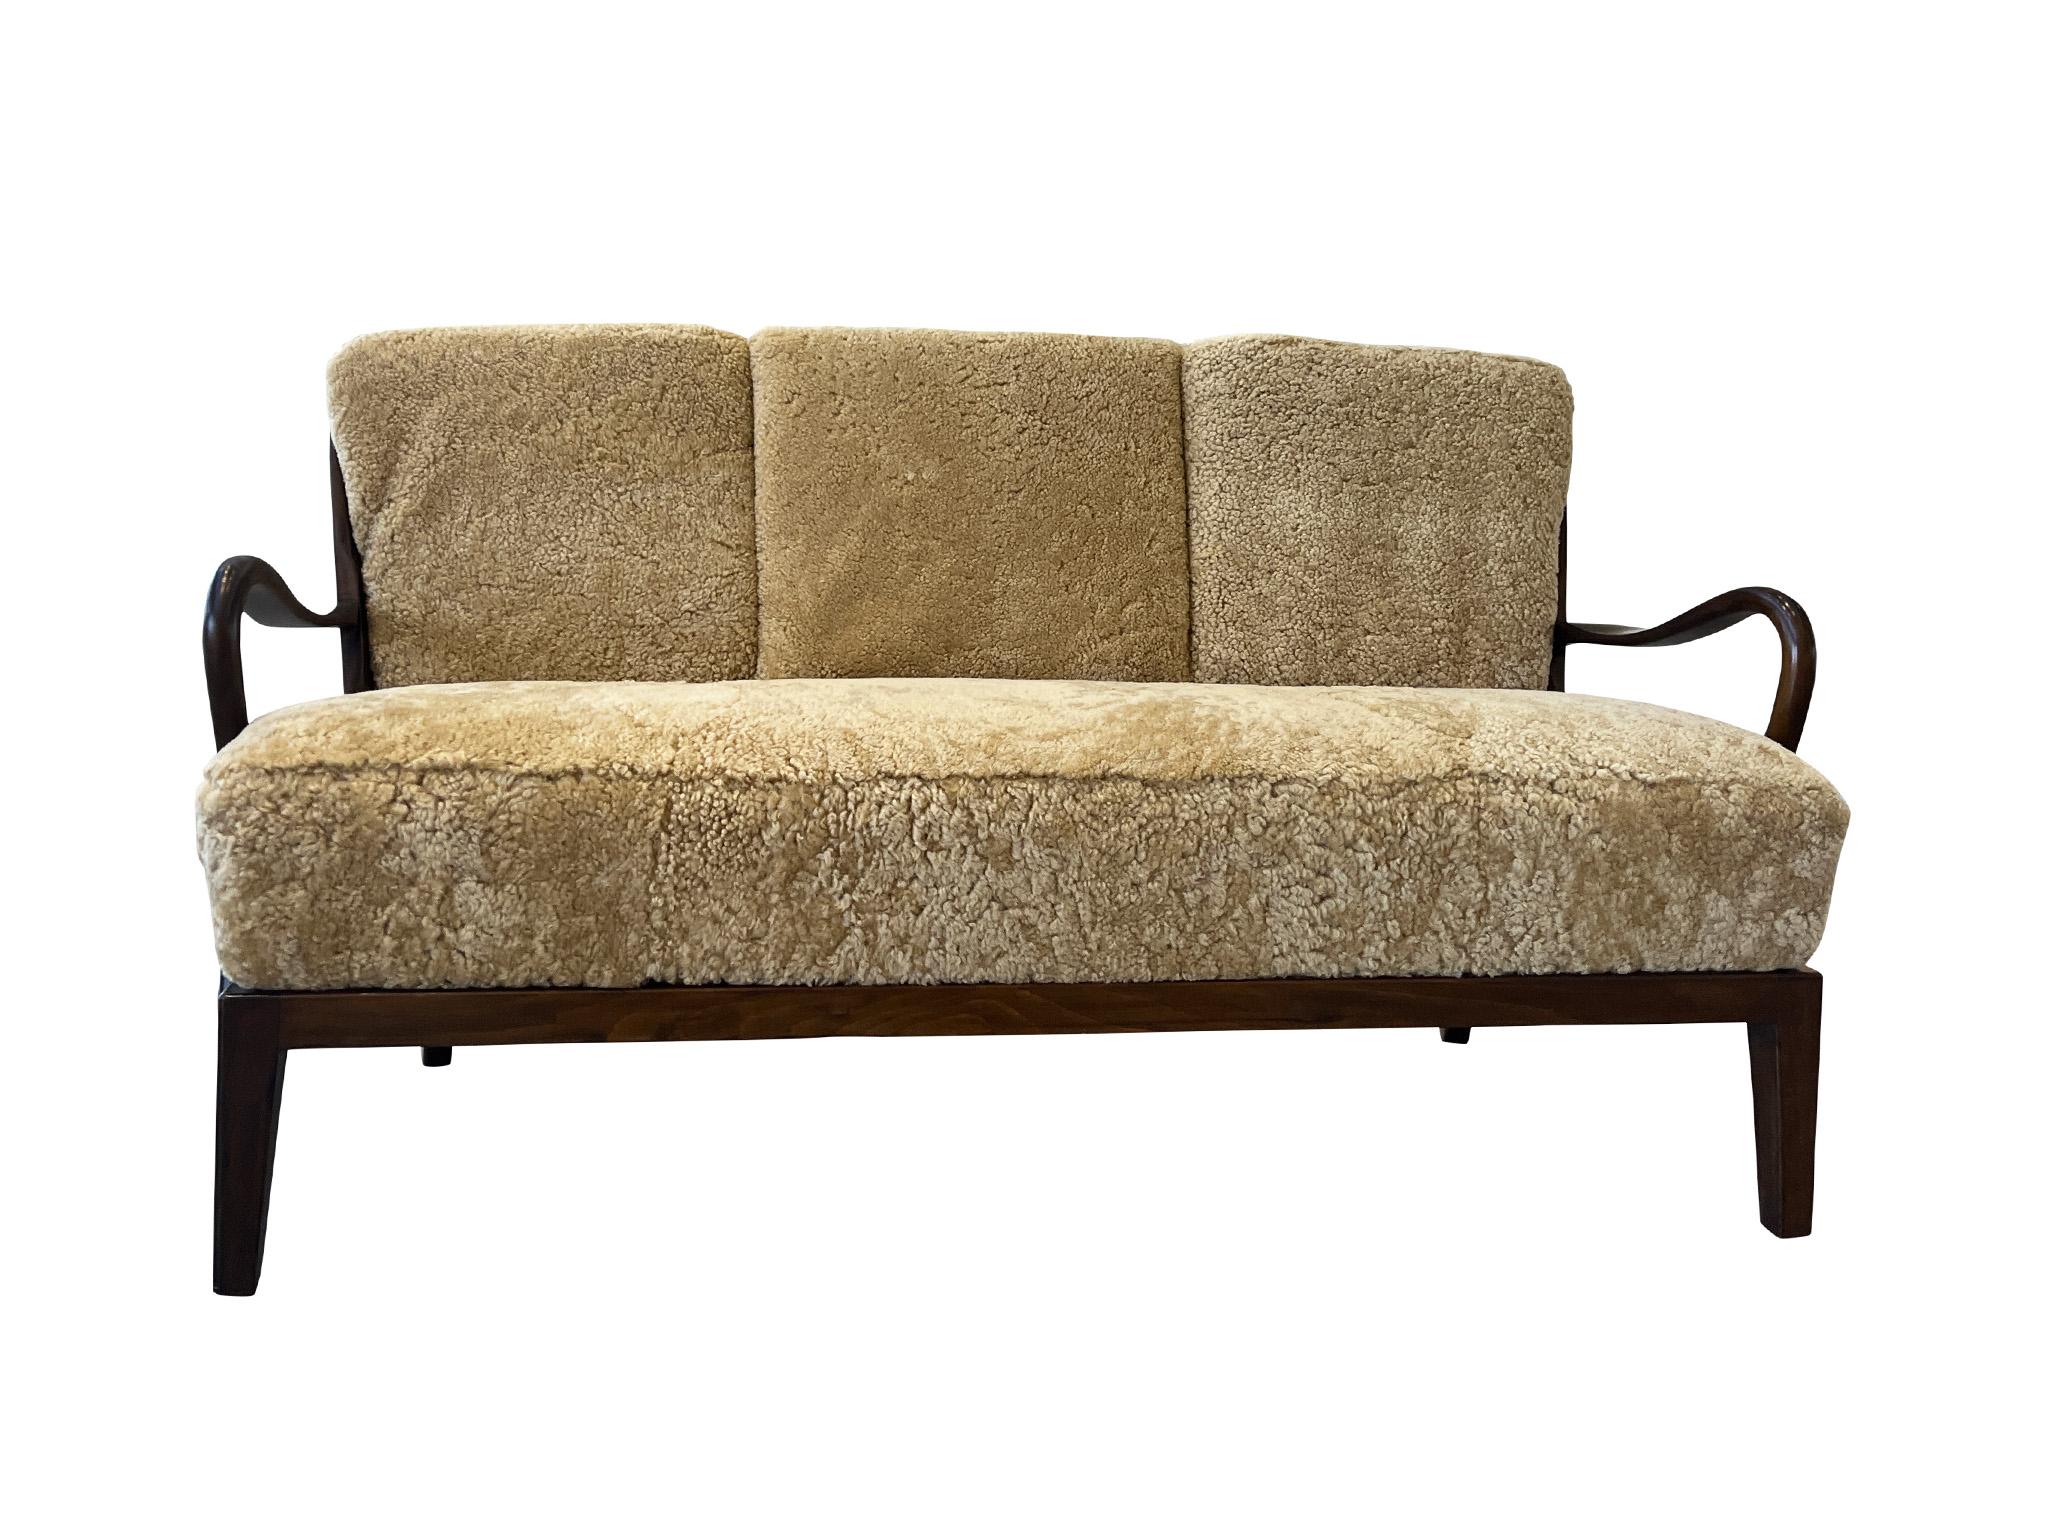 1940s Danish Settee by Alfred Christensen in Tan Shearling For Sale 1